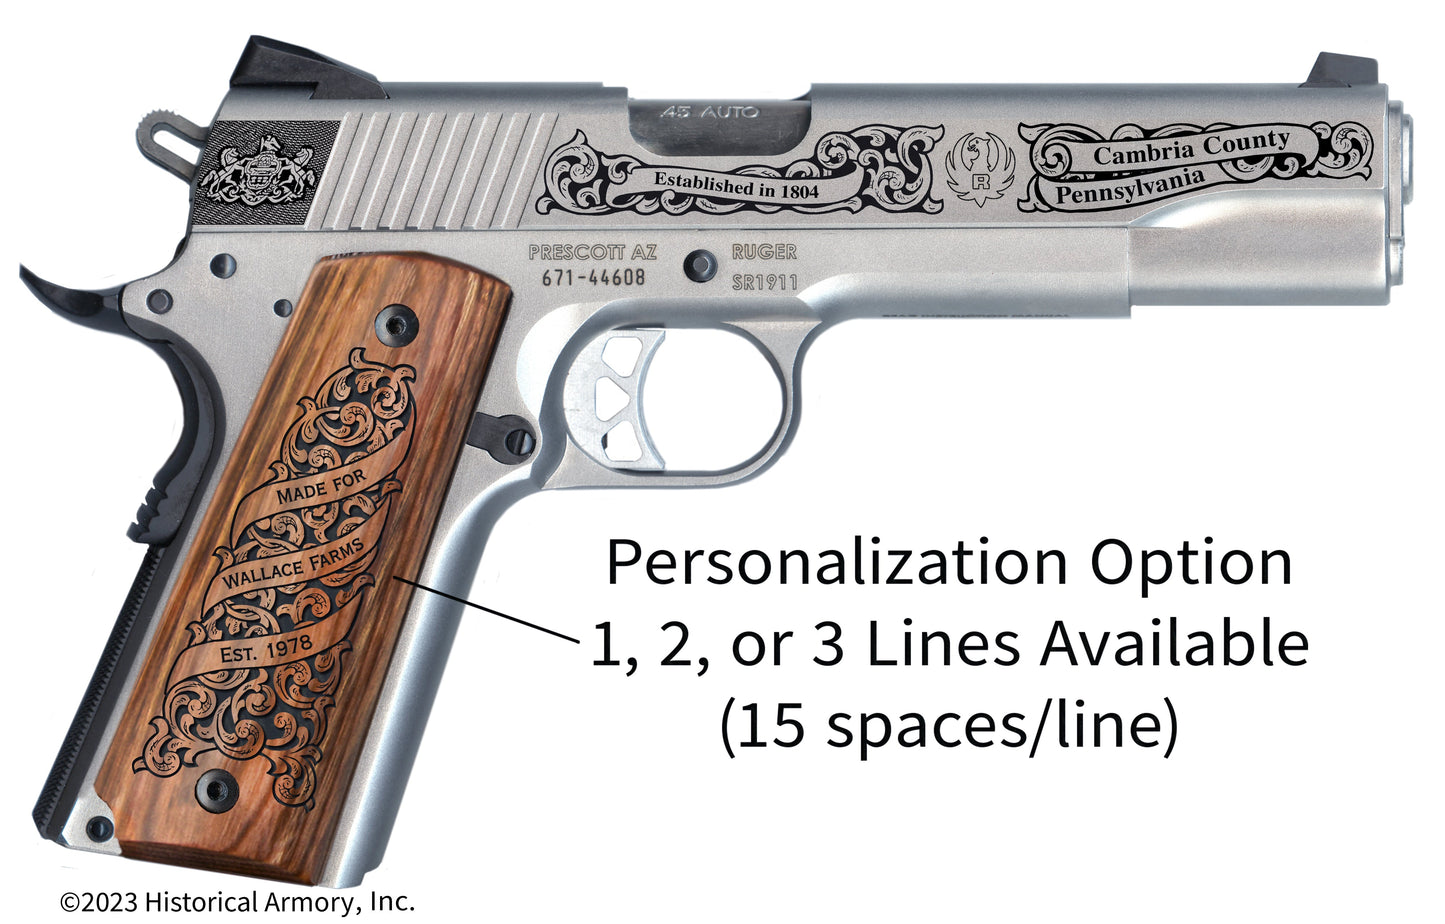 Cambria County Pennsylvania Personalized Engraved .45 Auto Ruger 1911